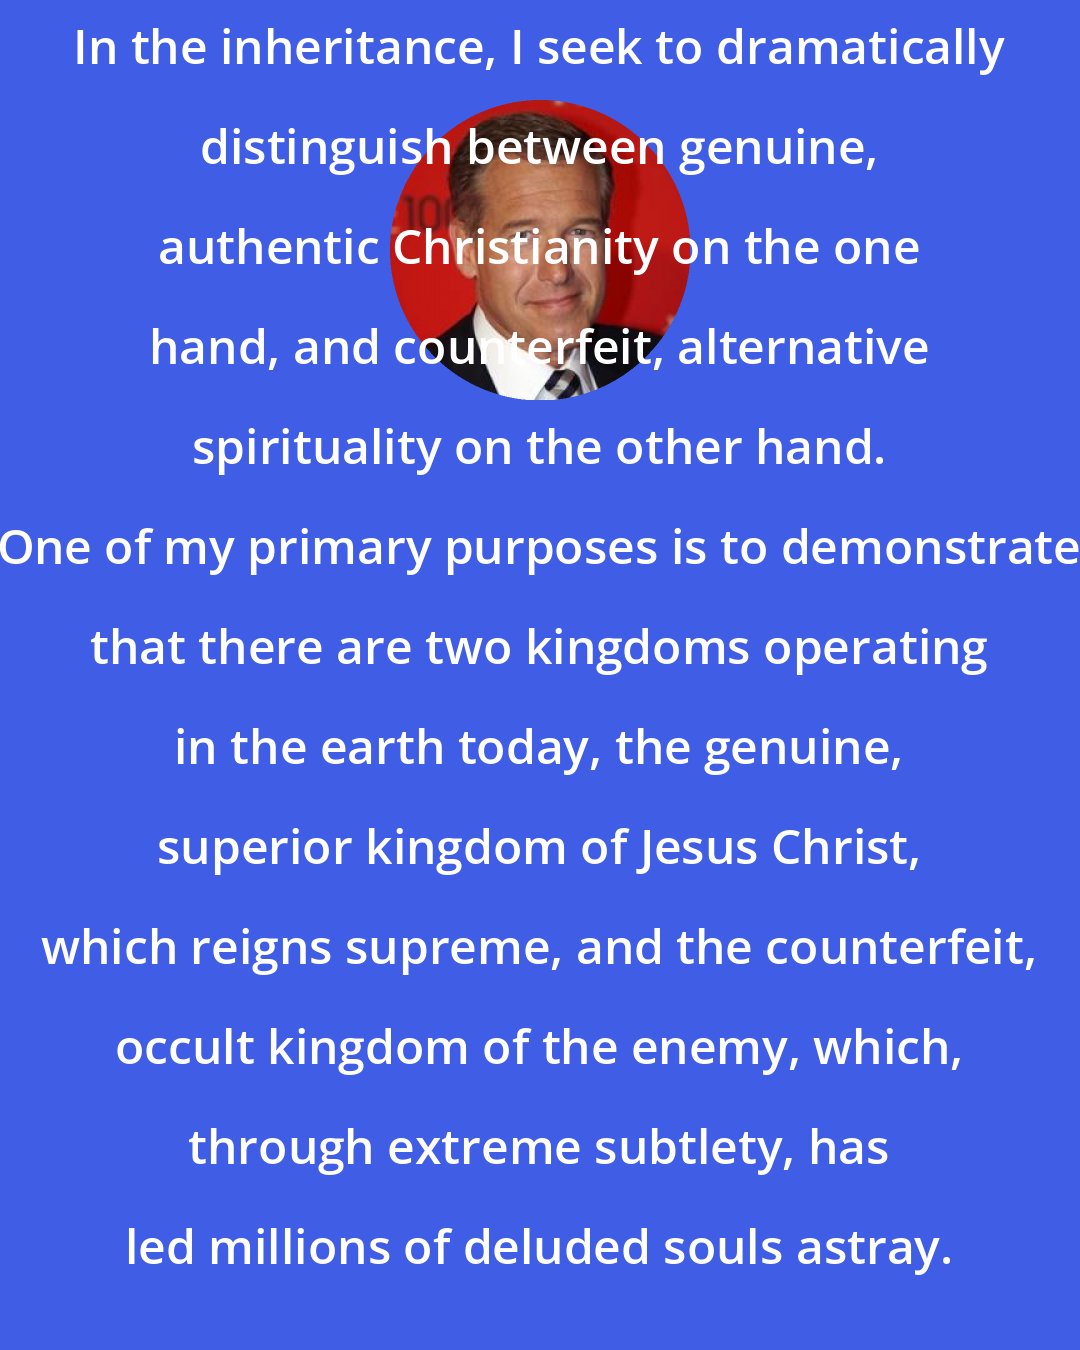 Brian Williams: In the inheritance, I seek to dramatically distinguish between genuine, authentic Christianity on the one hand, and counterfeit, alternative spirituality on the other hand. One of my primary purposes is to demonstrate that there are two kingdoms operating in the earth today, the genuine, superior kingdom of Jesus Christ, which reigns supreme, and the counterfeit, occult kingdom of the enemy, which, through extreme subtlety, has led millions of deluded souls astray.